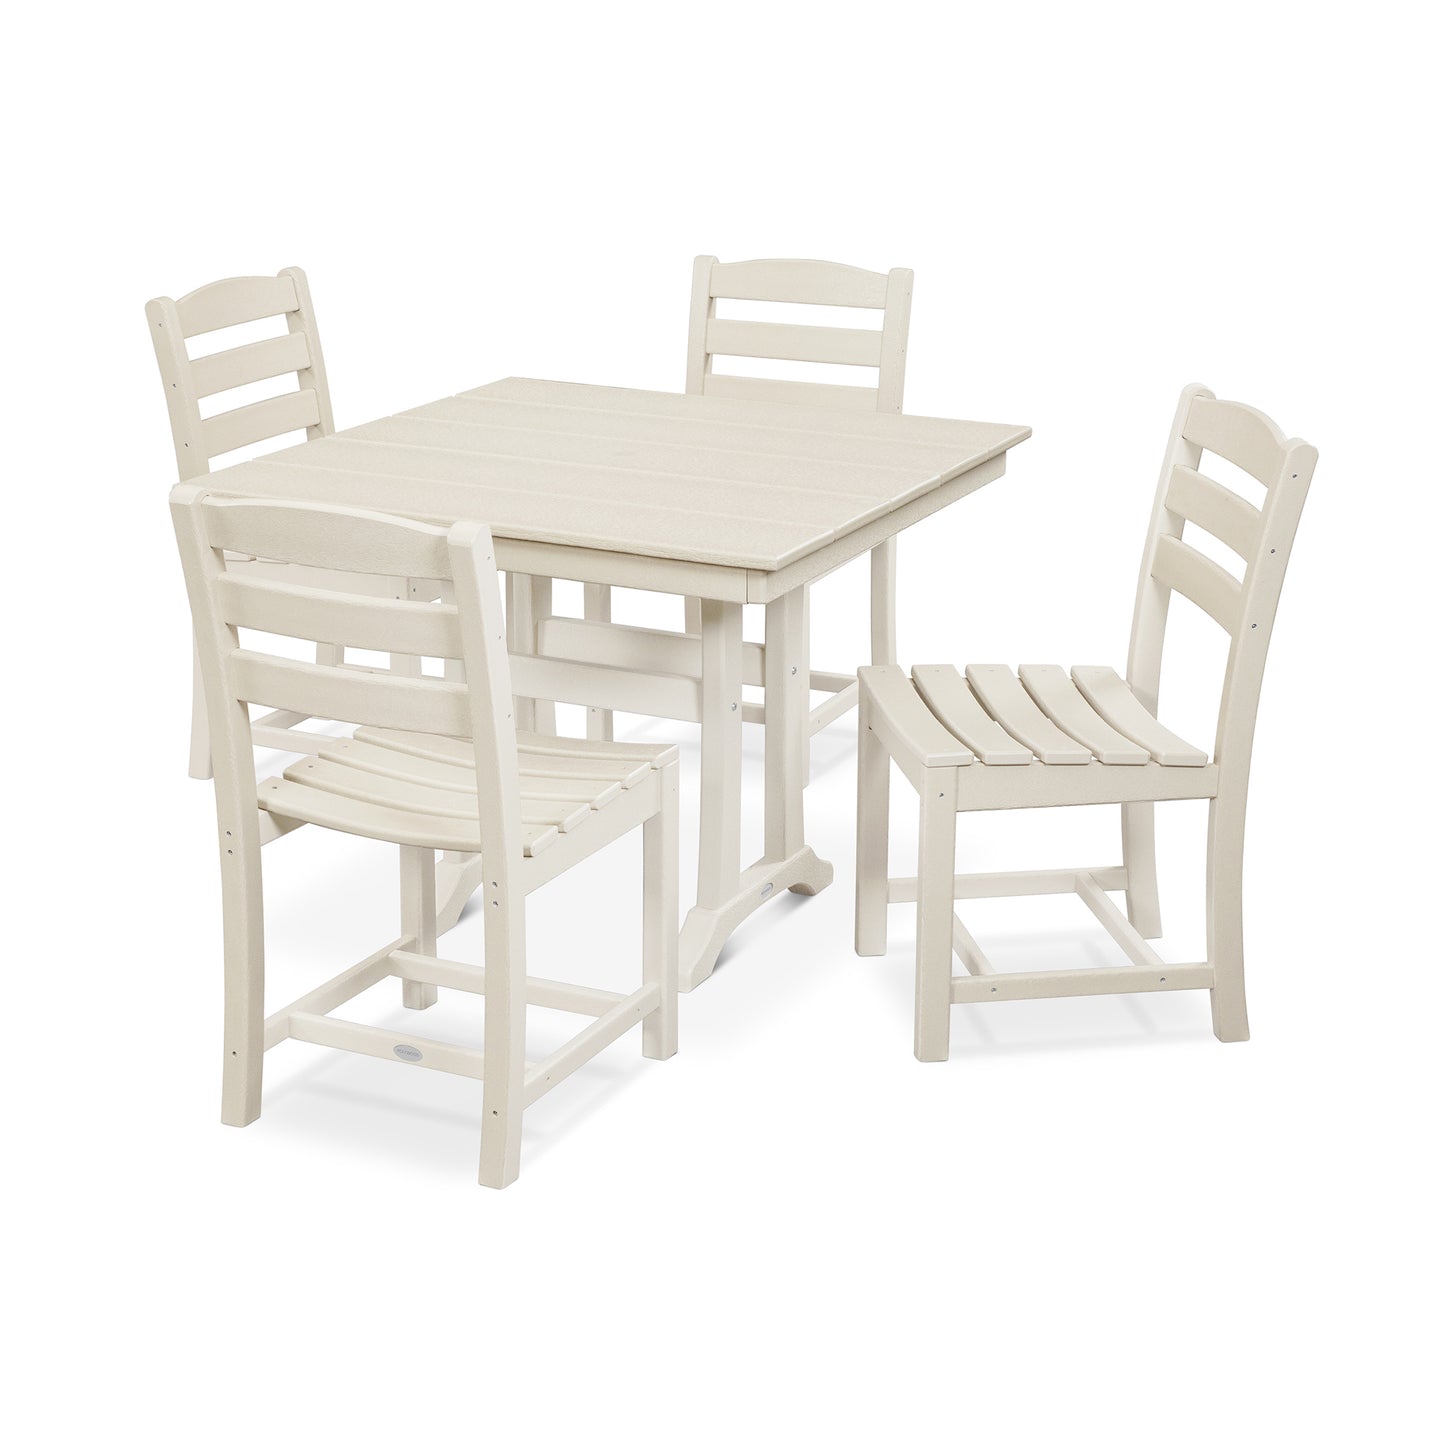 A set of white POLYWOOD La Casa Café 5-Piece Farmhouse Trestle Side Chair Dining Set including a square table and three chairs with slatted backs and seats, displayed on a plain white background.